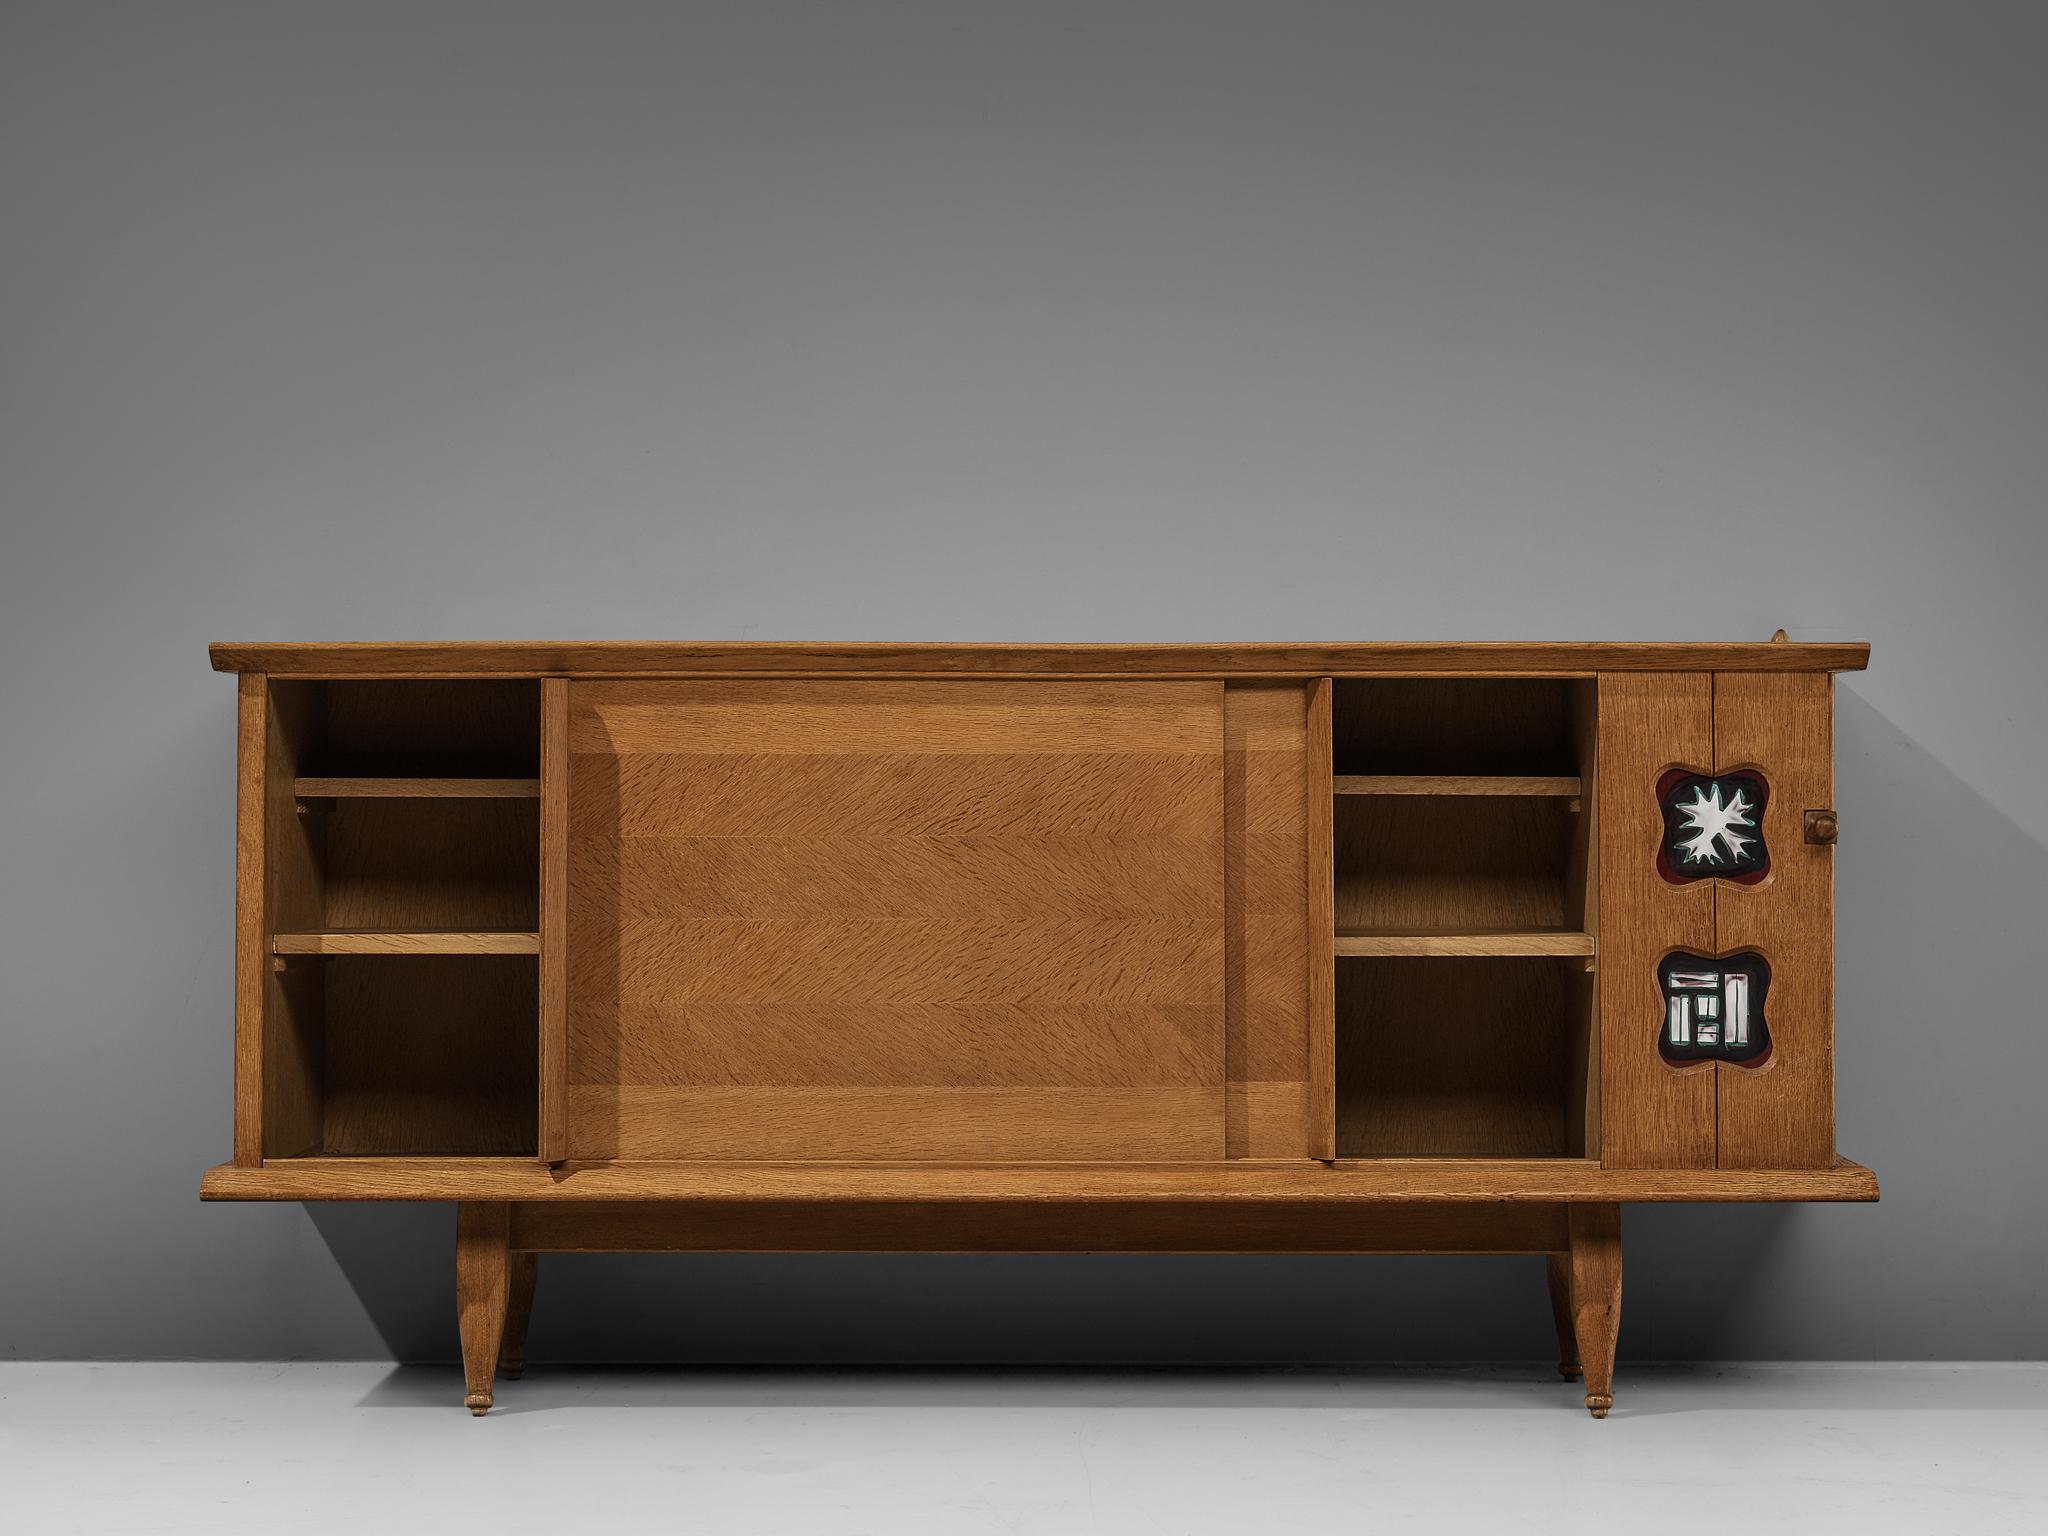 Guillerme et Chambron, credenza, in oak, brass, ceramic tiles, France, 1960s.

Characteristic sideboard in solid oak. This cabinet holds all the characteristics of the French designer duo Jacques Chambron and Robert Guillerme. As many of the